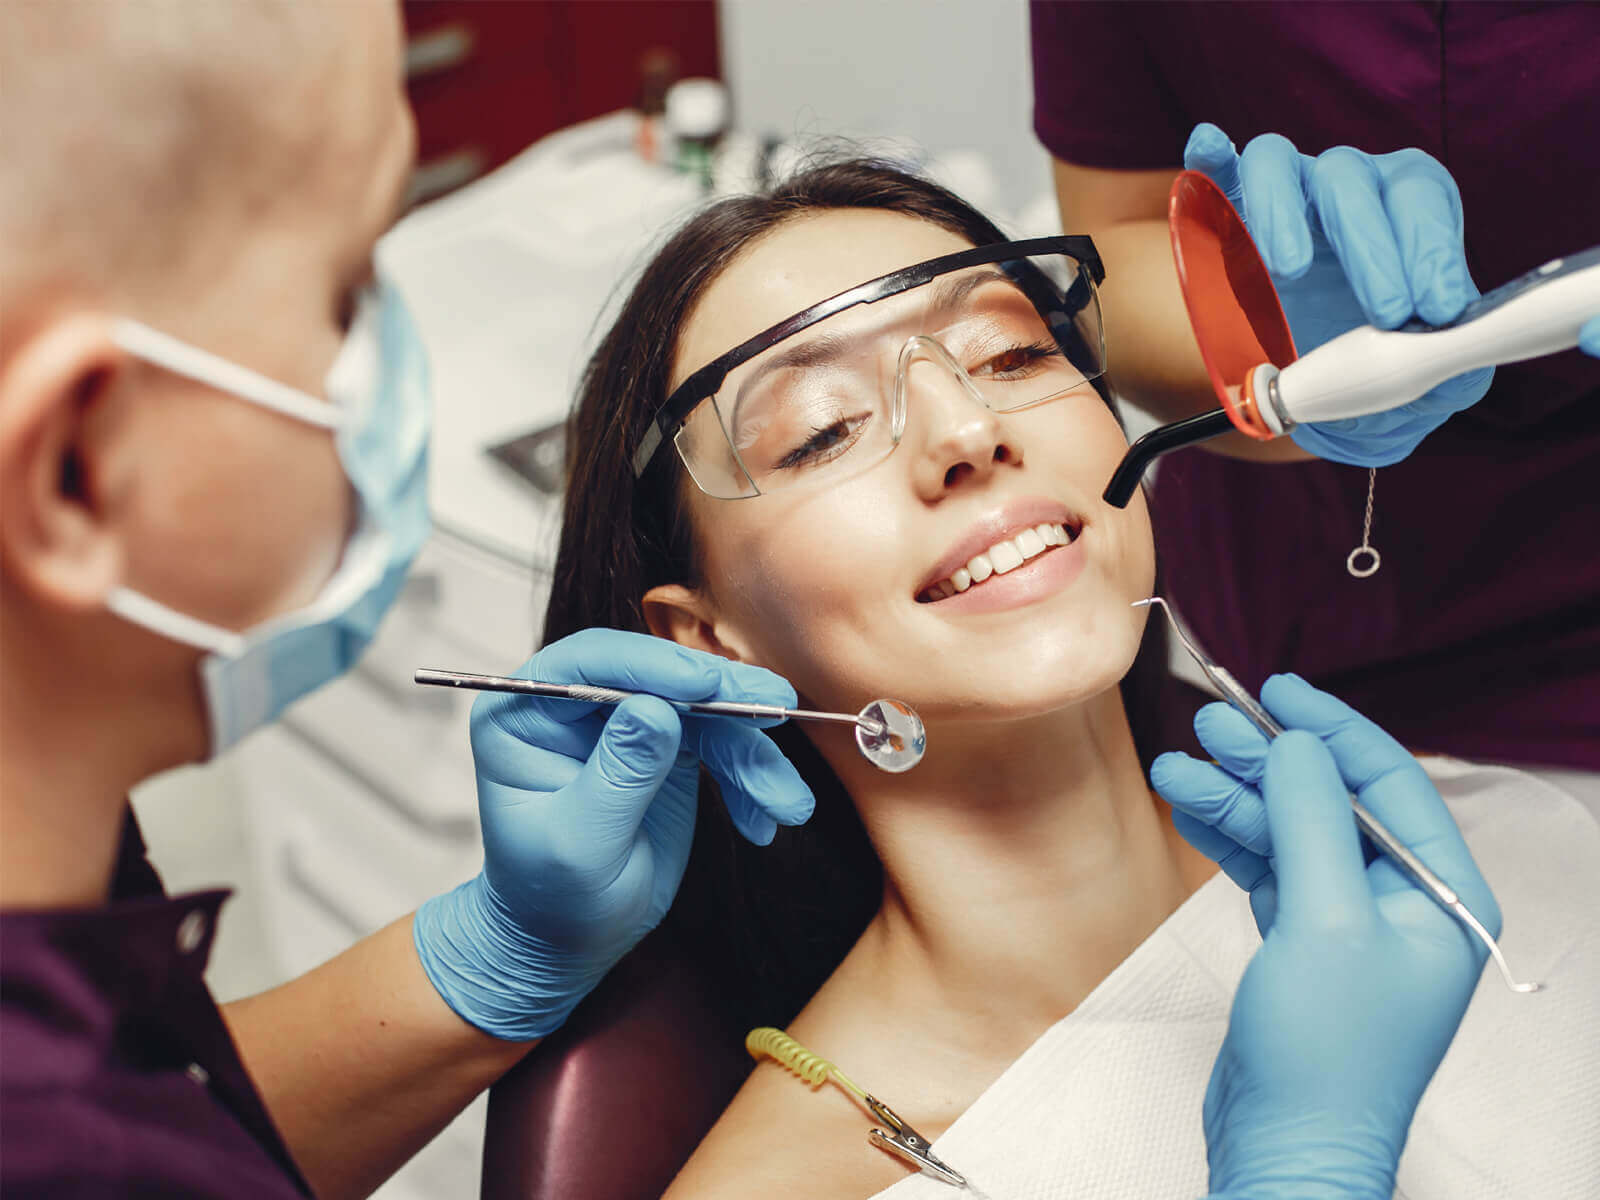 What Is The Best Age To Start Orthodontic Treatment?